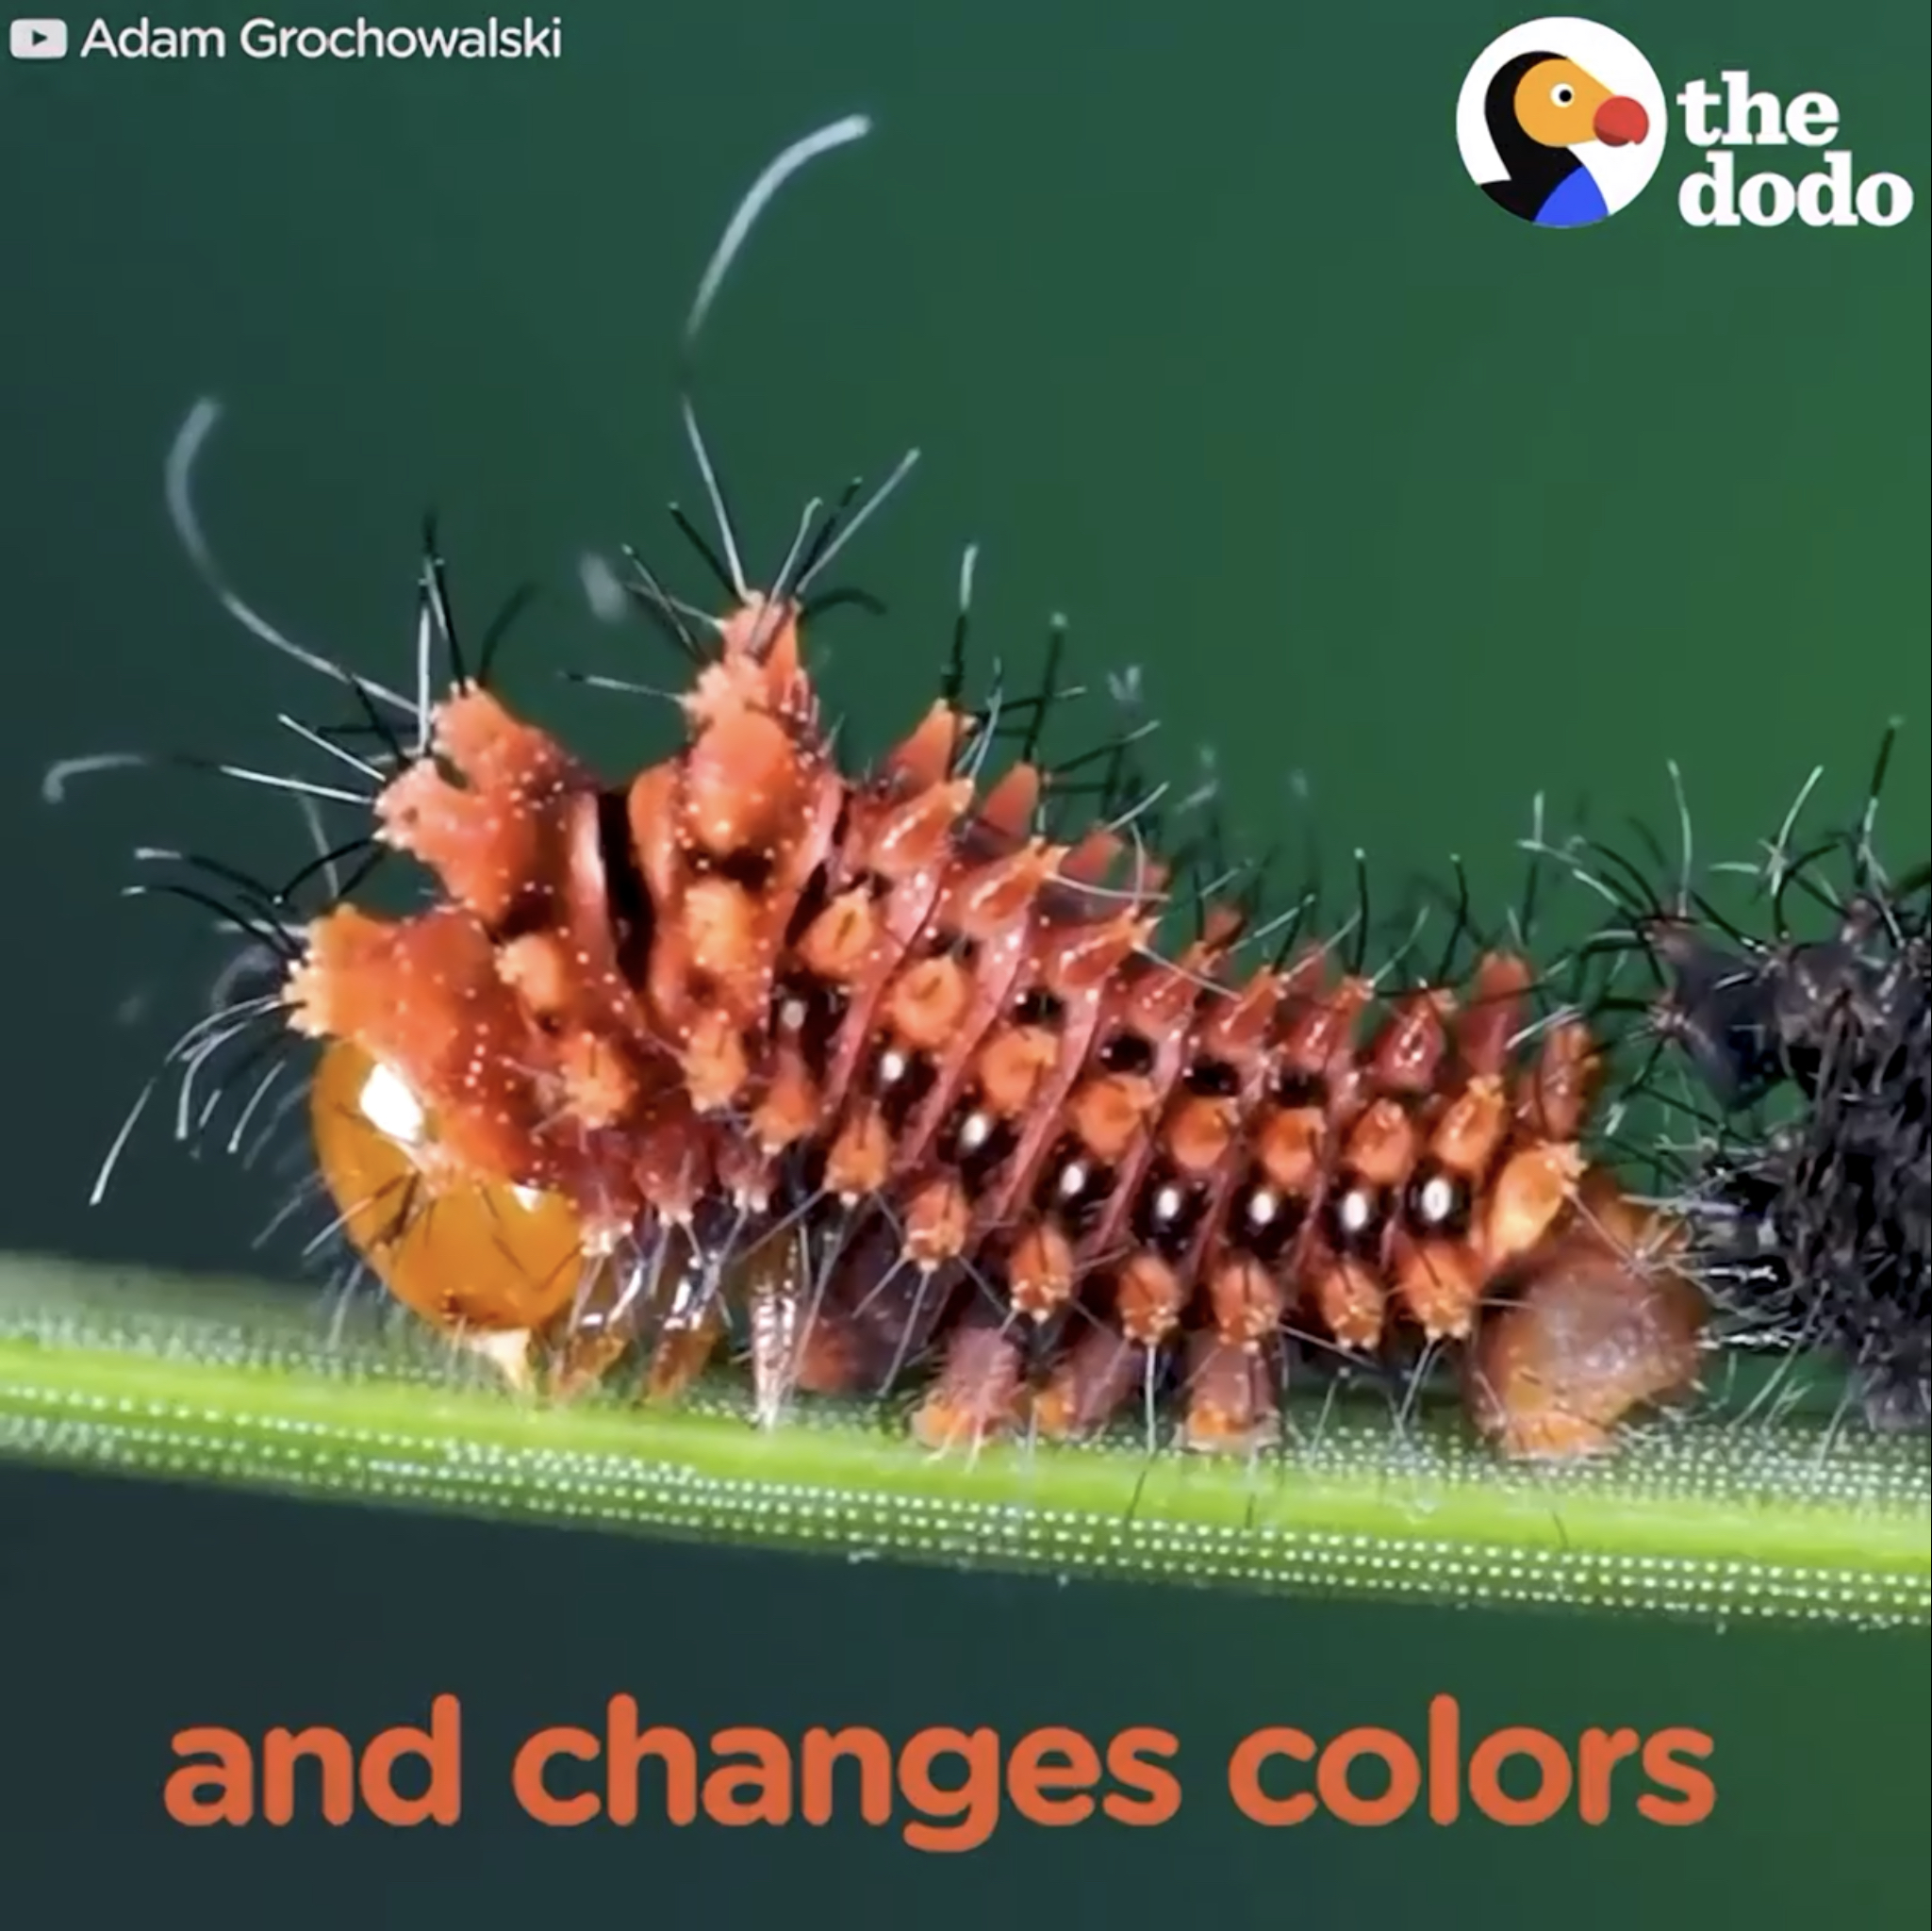 One day, the caterpillar stops eating, hangs upside down from a twig or leaf and spins itself a silky cocoon or molts into a shiny chrysalis. Within its protective casing, the caterpillar radically transforms its body, eventually emerging as a butterfly or moth.